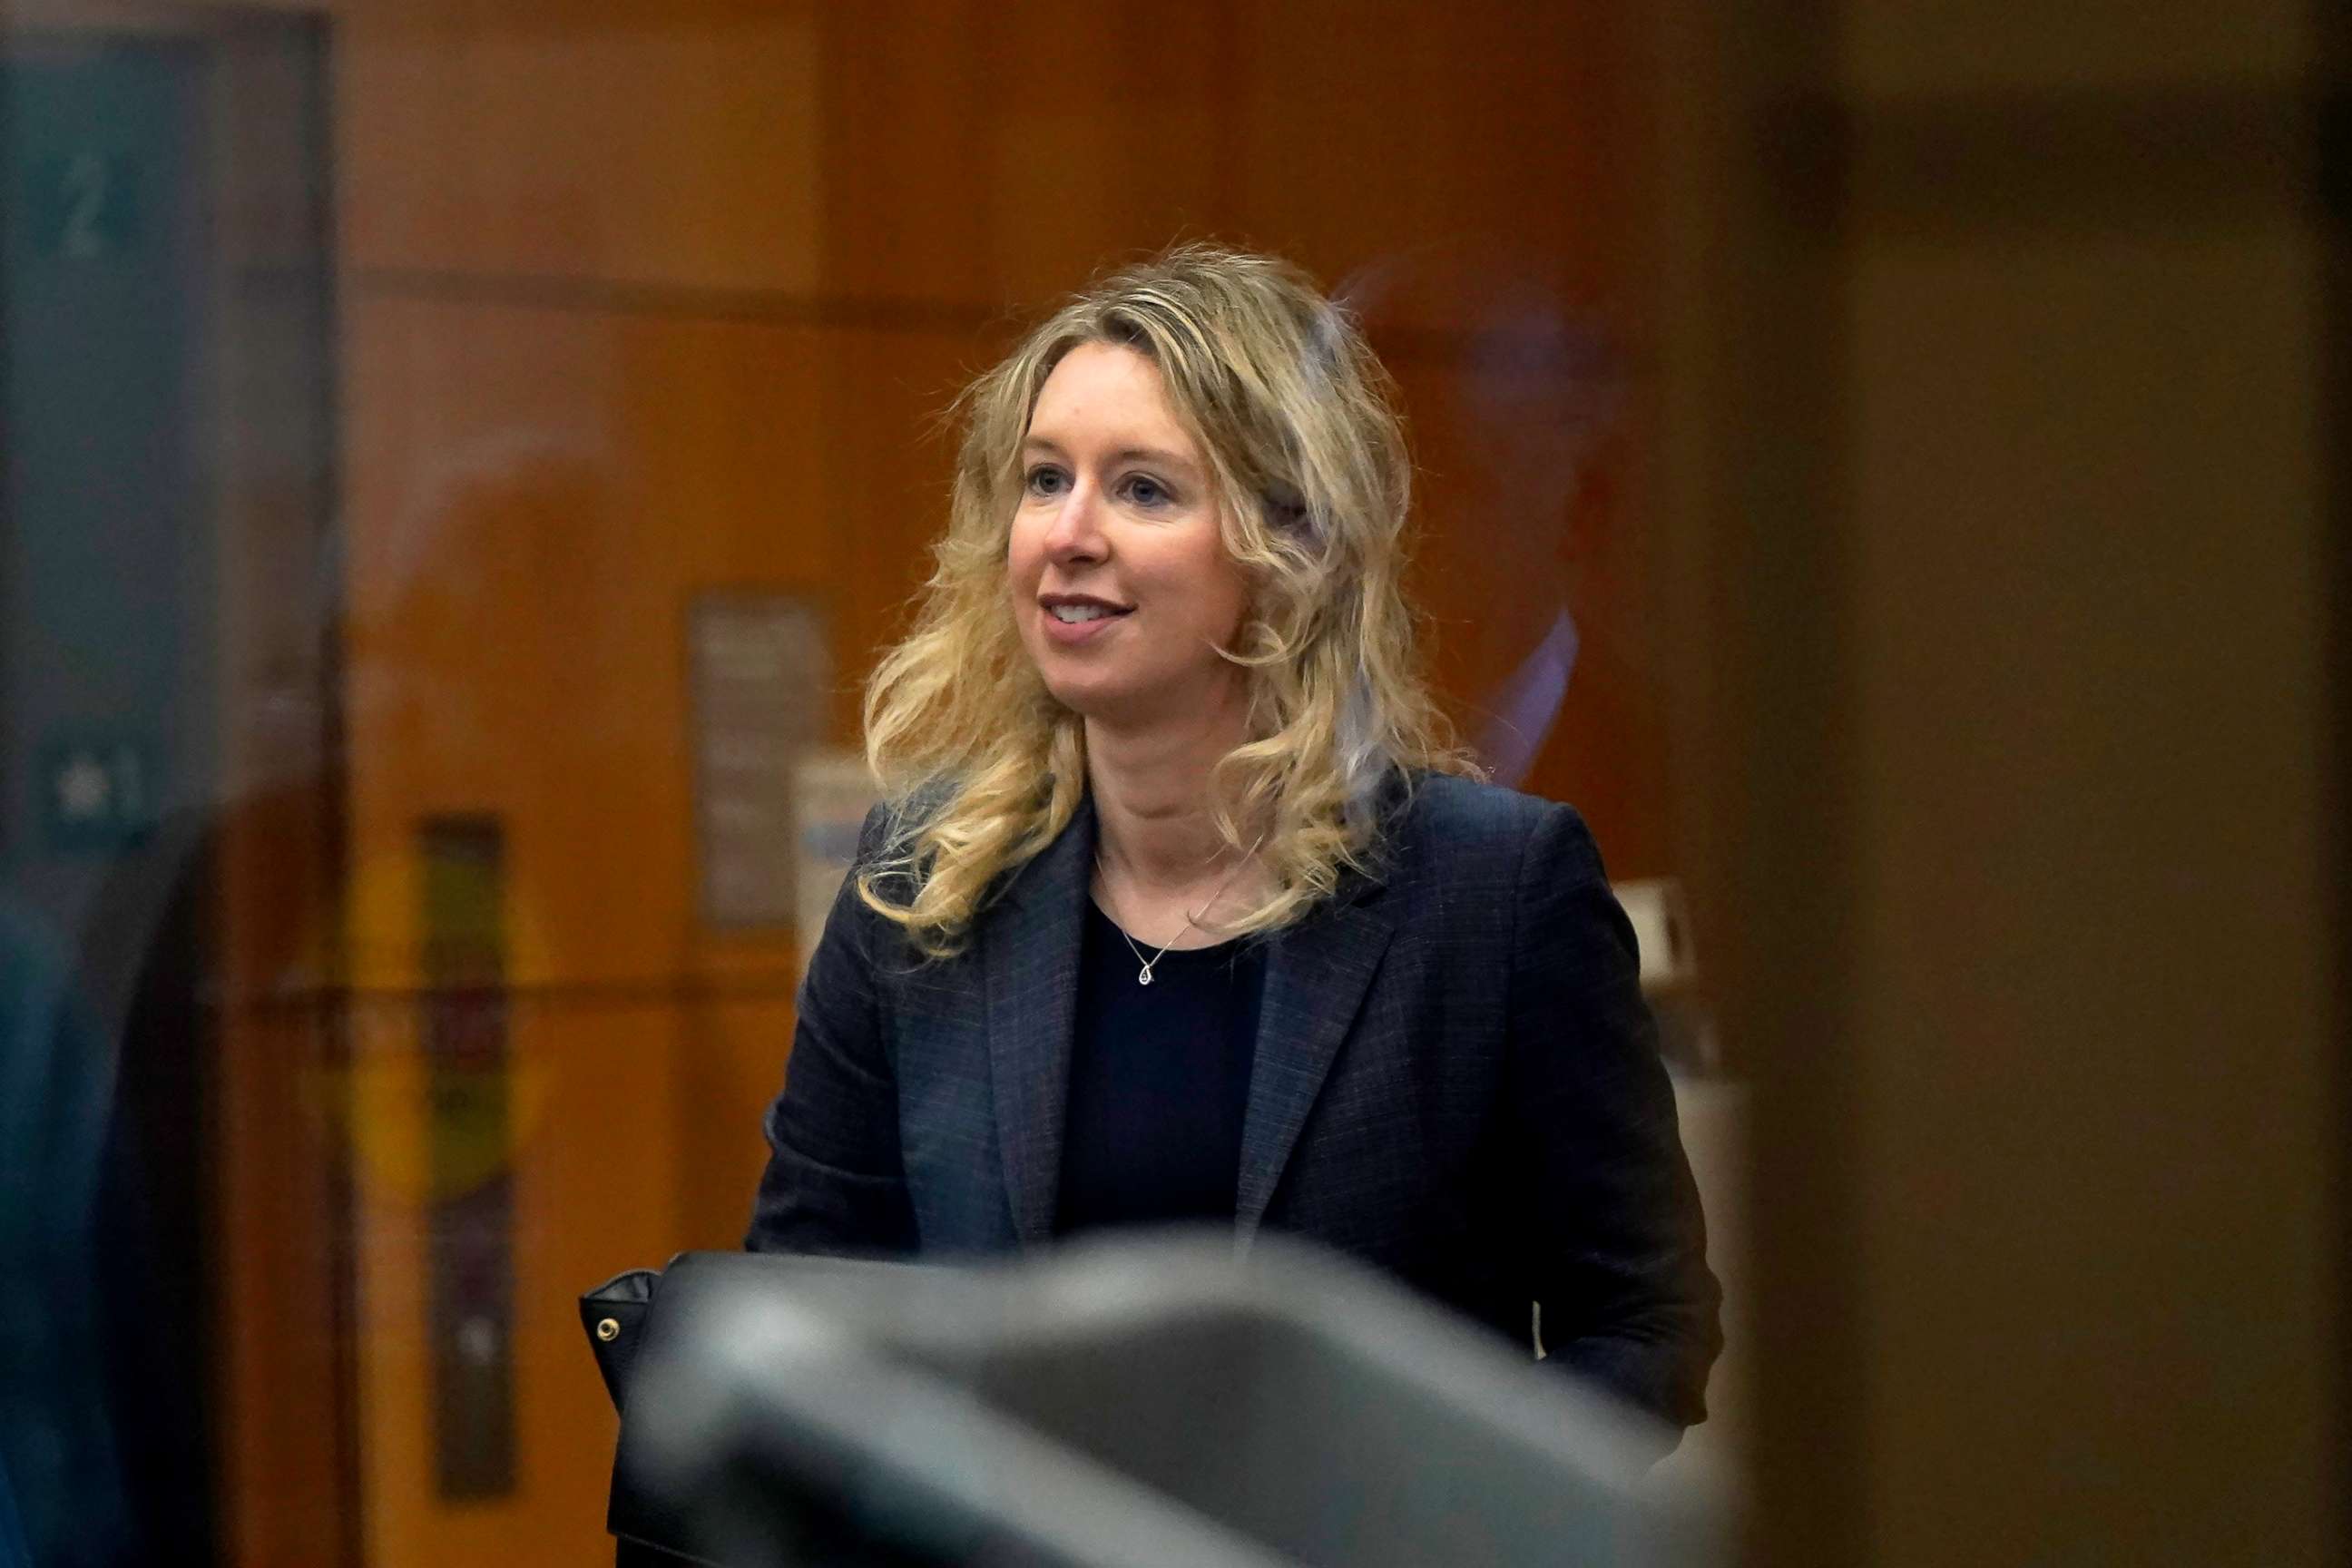 PHOTO: In this Oct. 17, 2022, file photo, former Theranos CEO Elizabeth Holmes arrives at federal court in San Jose, Calif.